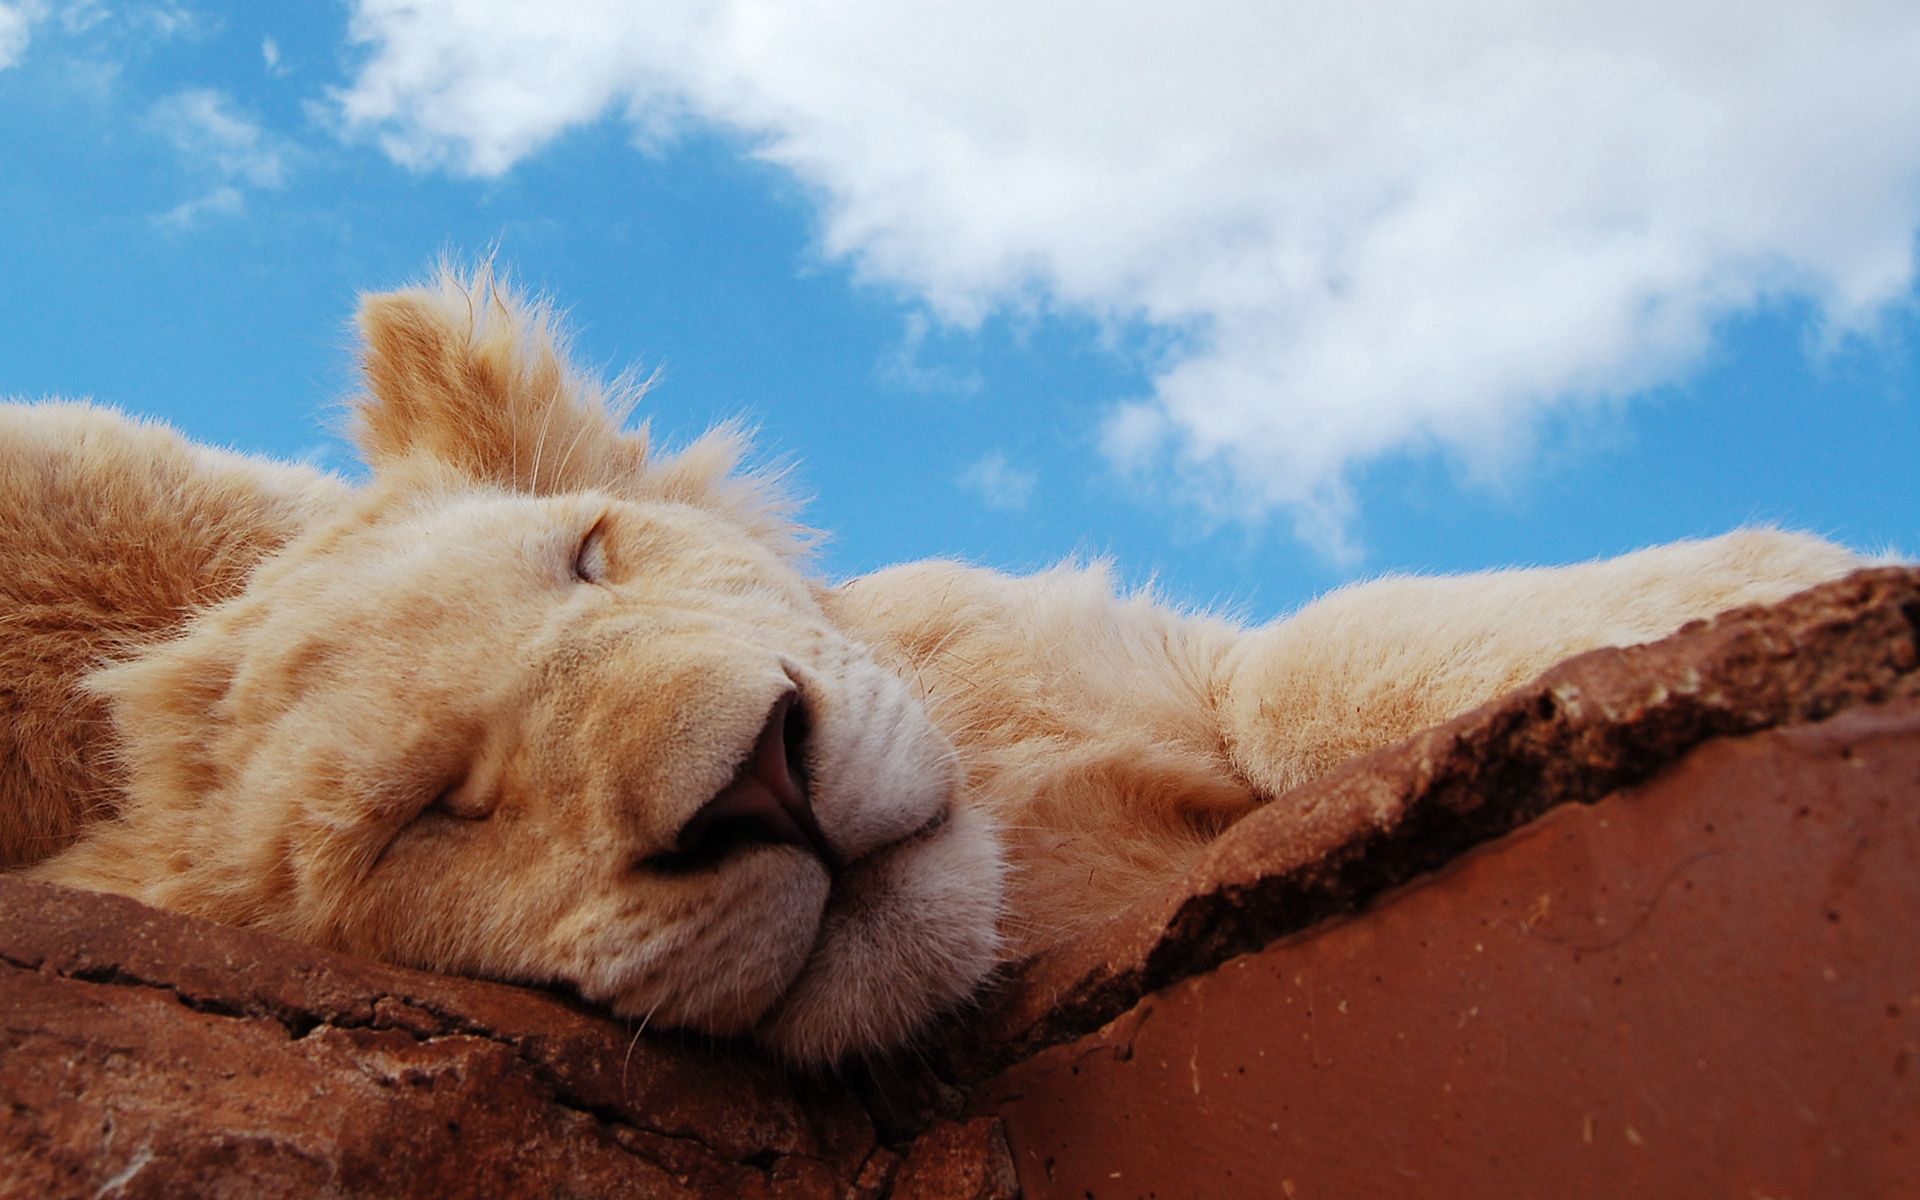 lion cub, animals, clouds, young, muzzle, lion, sleep, dream, joey